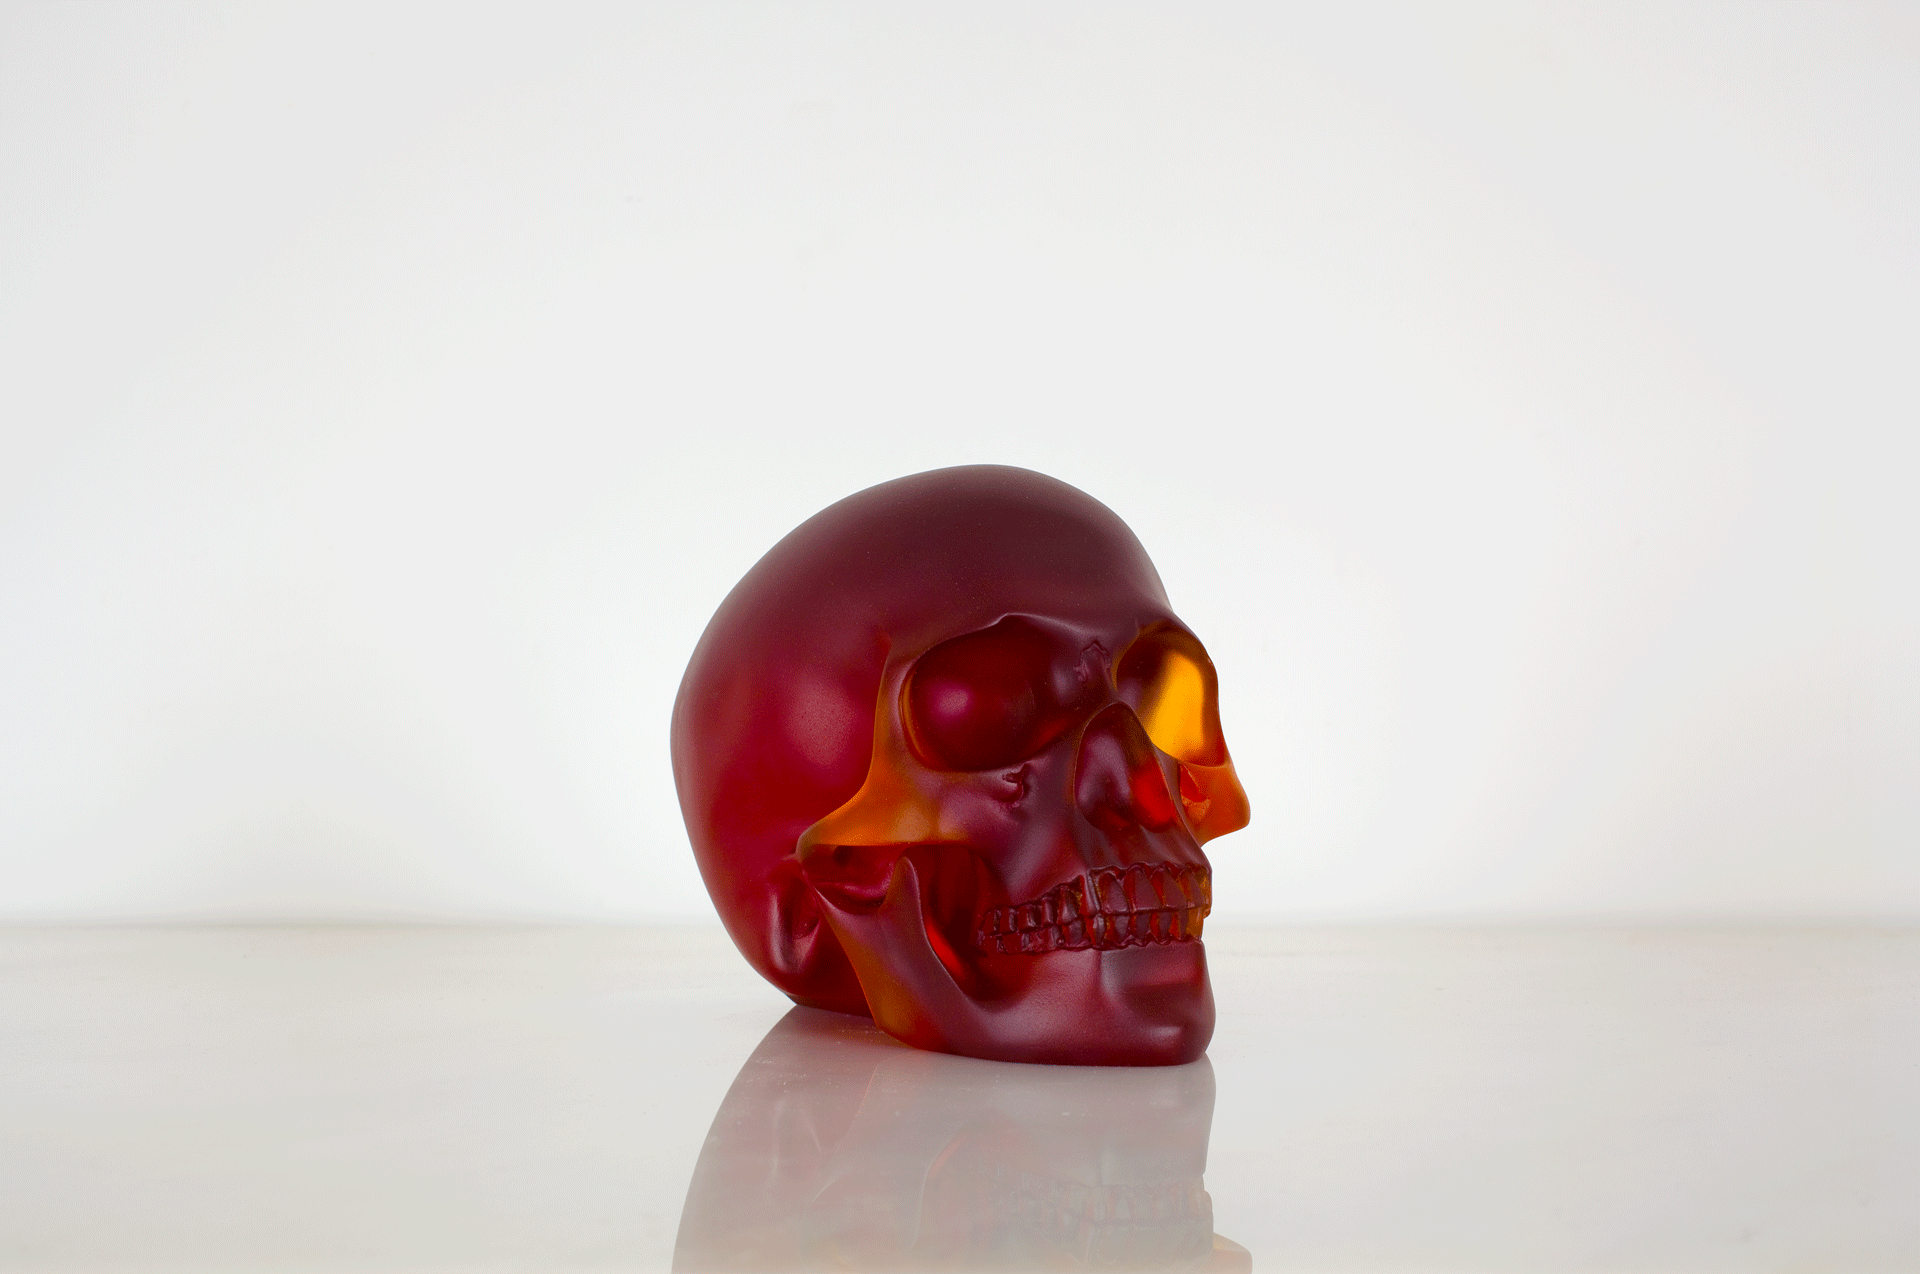 A sculpture by Sherrie Levine, titled, Red Skull, dated 2011.